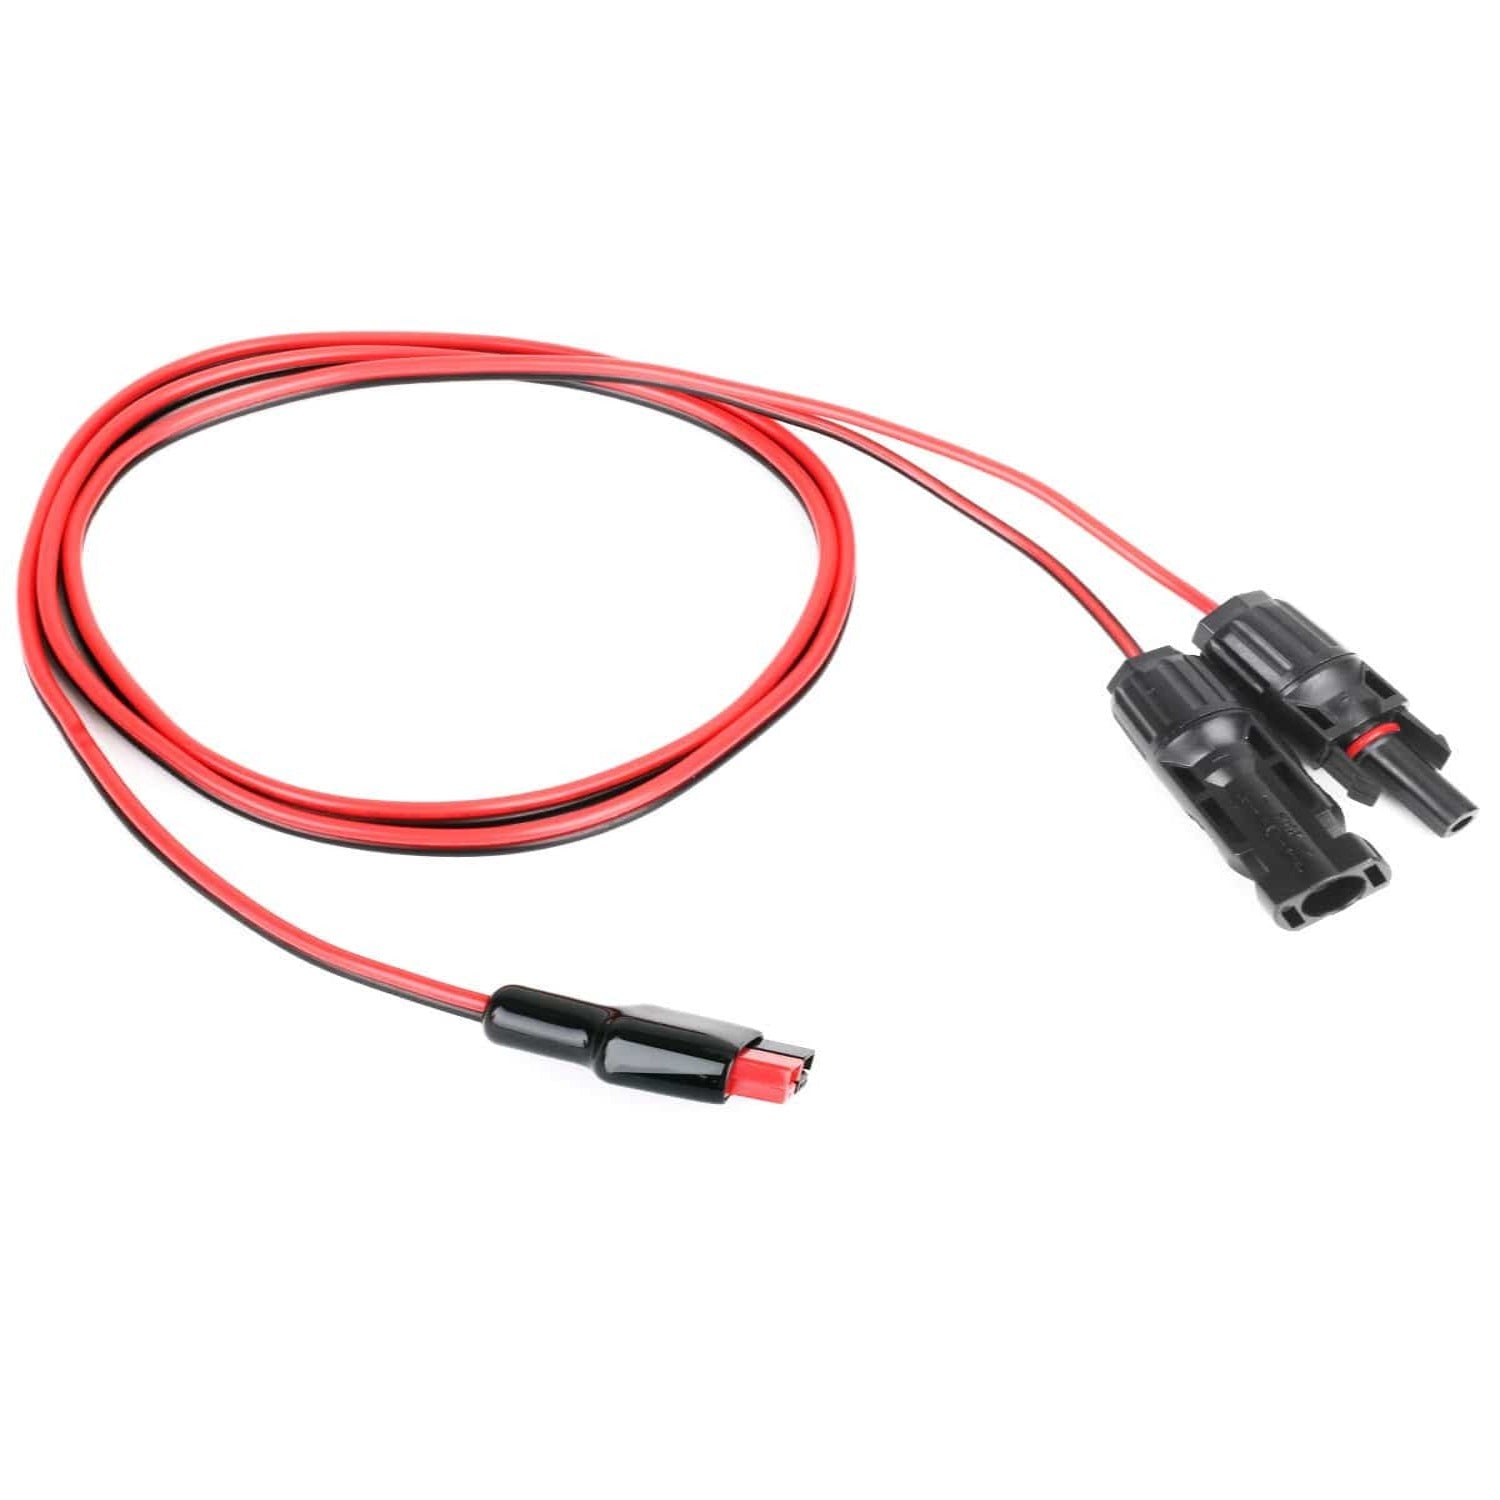 ALLPOWERS Anderson Solar Connector Adapter Cable